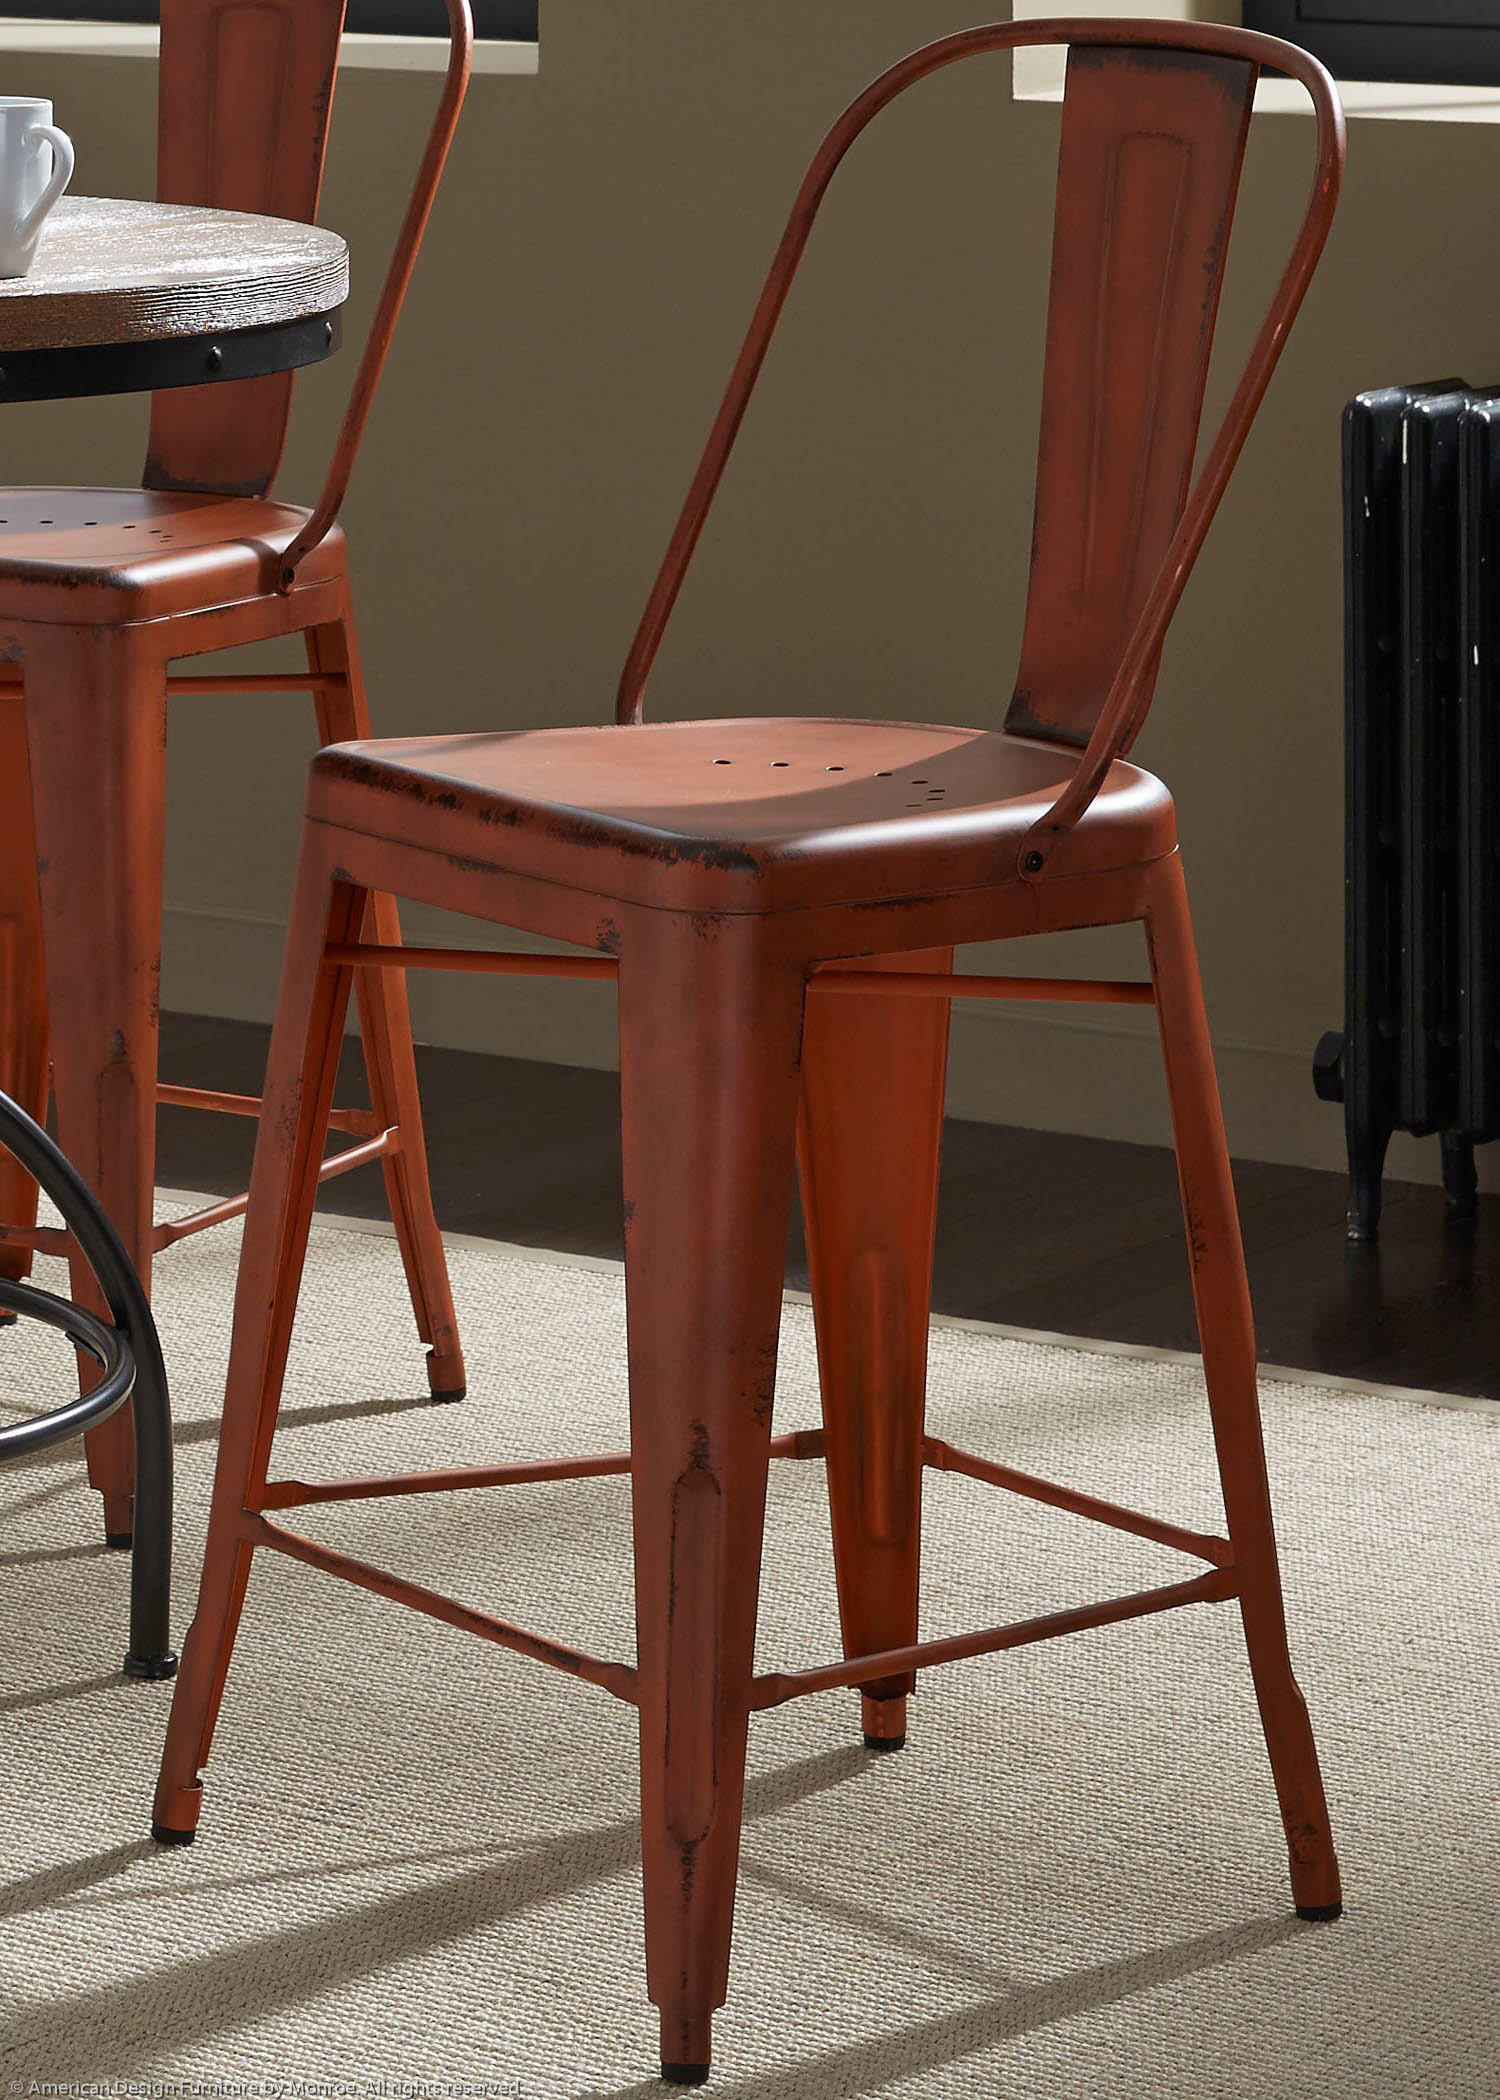 Reading Casual Bow Back Counter Chair Pic 08 (Heading Bow Back Counter Chair 2 (Orange)